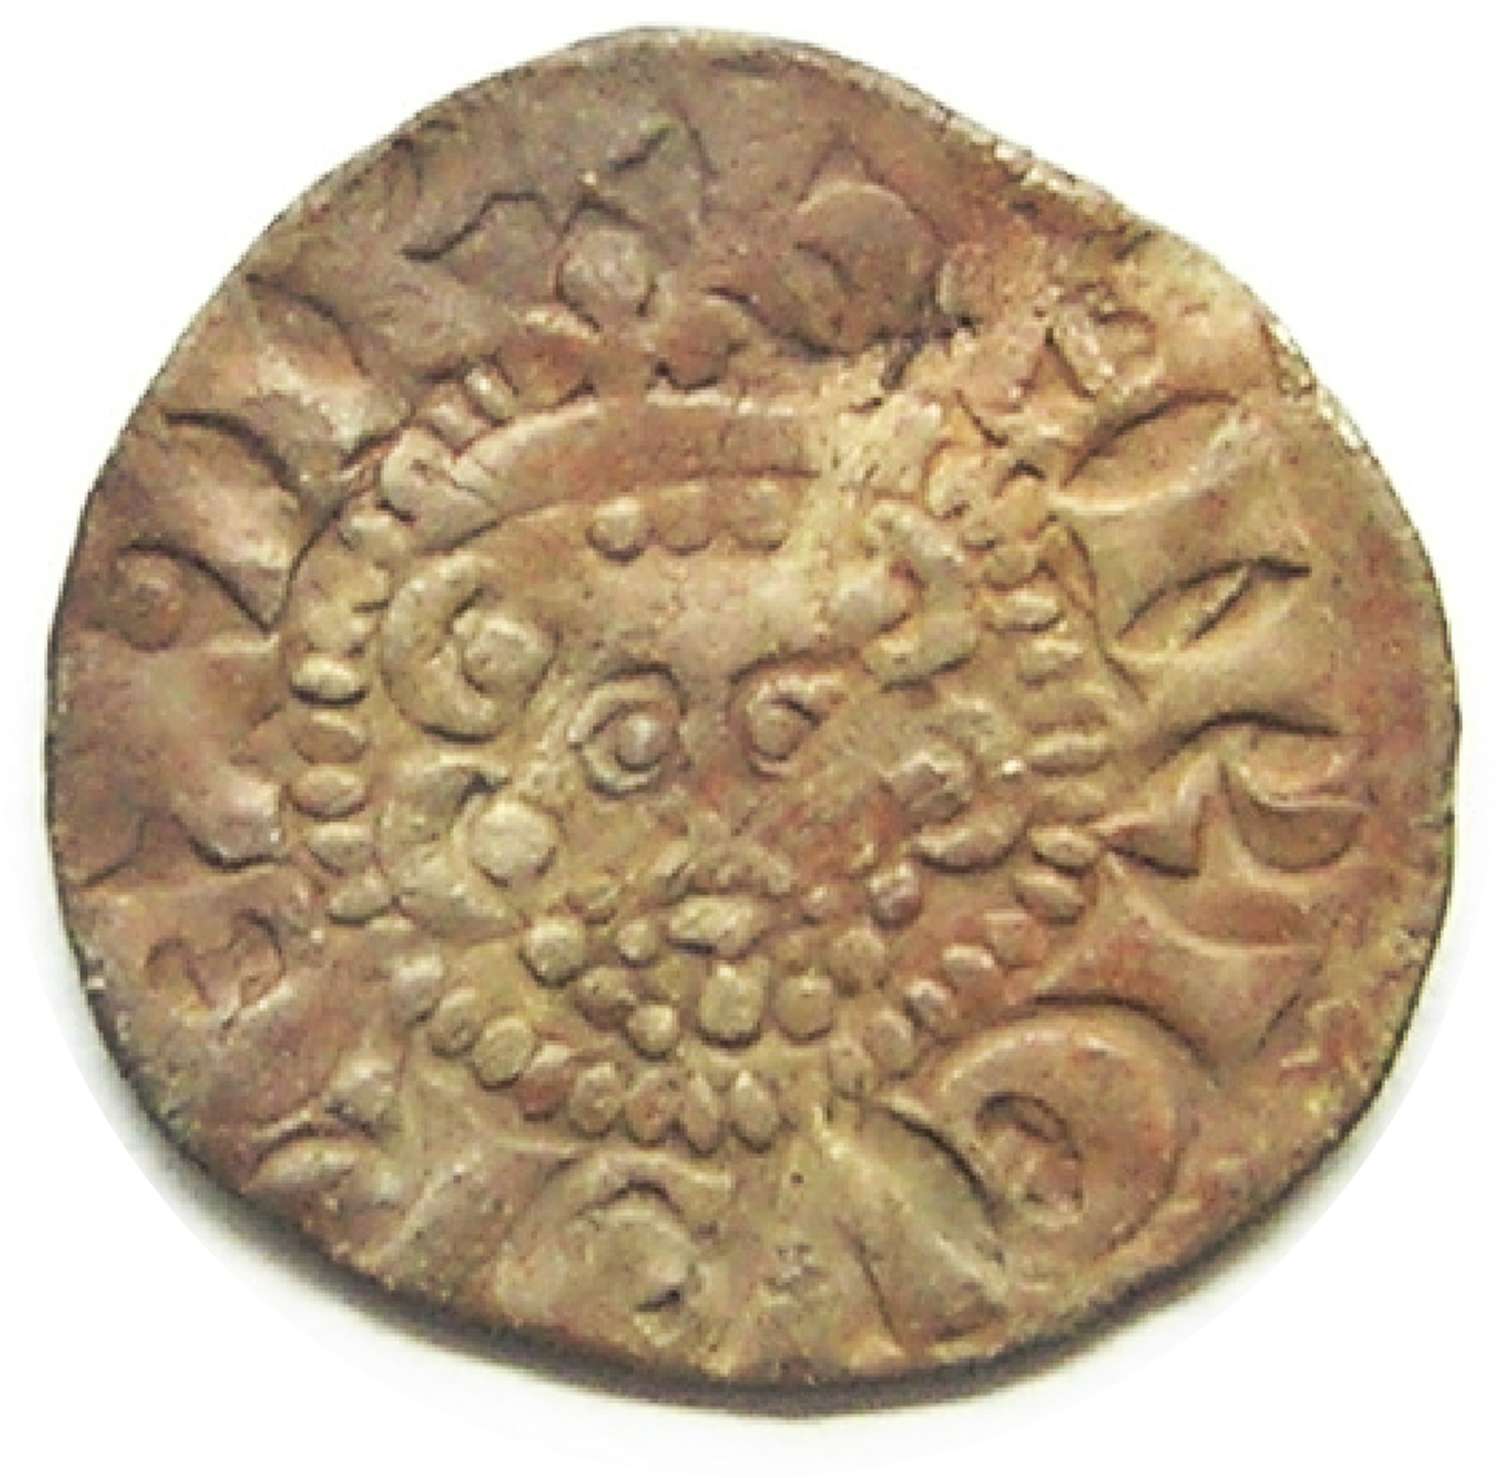 King Henry III Silver Penny minted by Henry of London